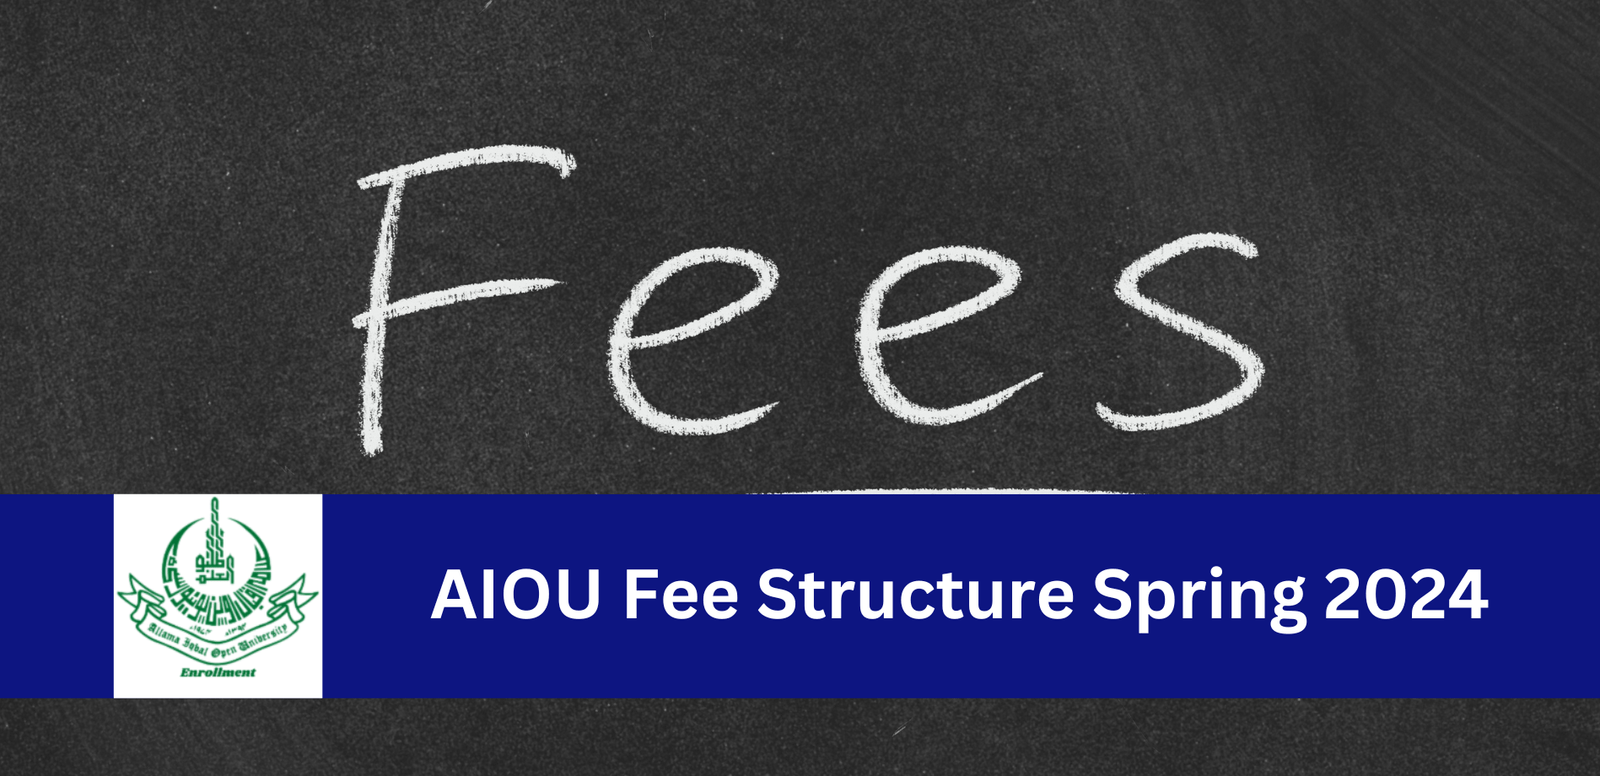 AIOU Fee Structure Spring 2024